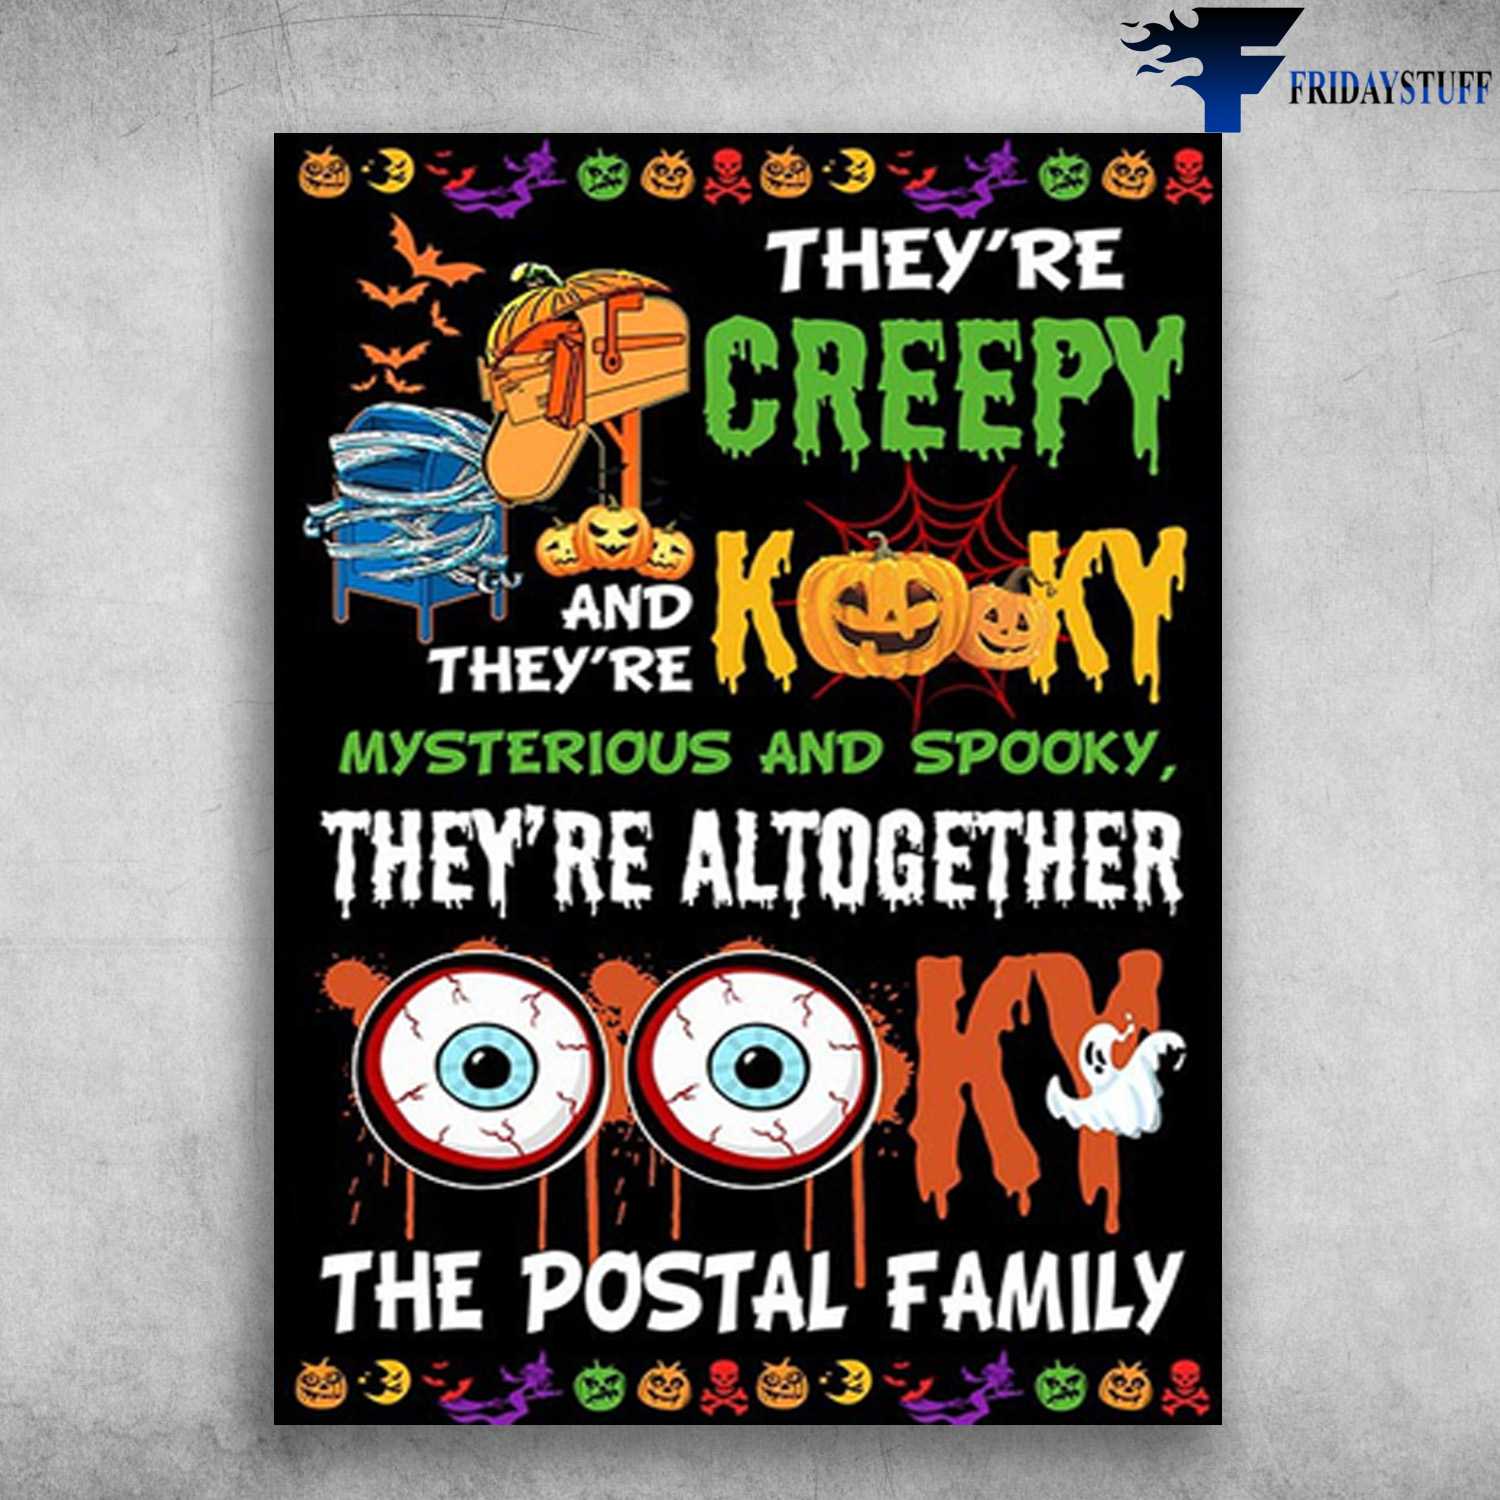 Halloween Poster - They're Creepy, And They're Kooky, Mysterious And Spooky, They're Altogether, The Postal Family